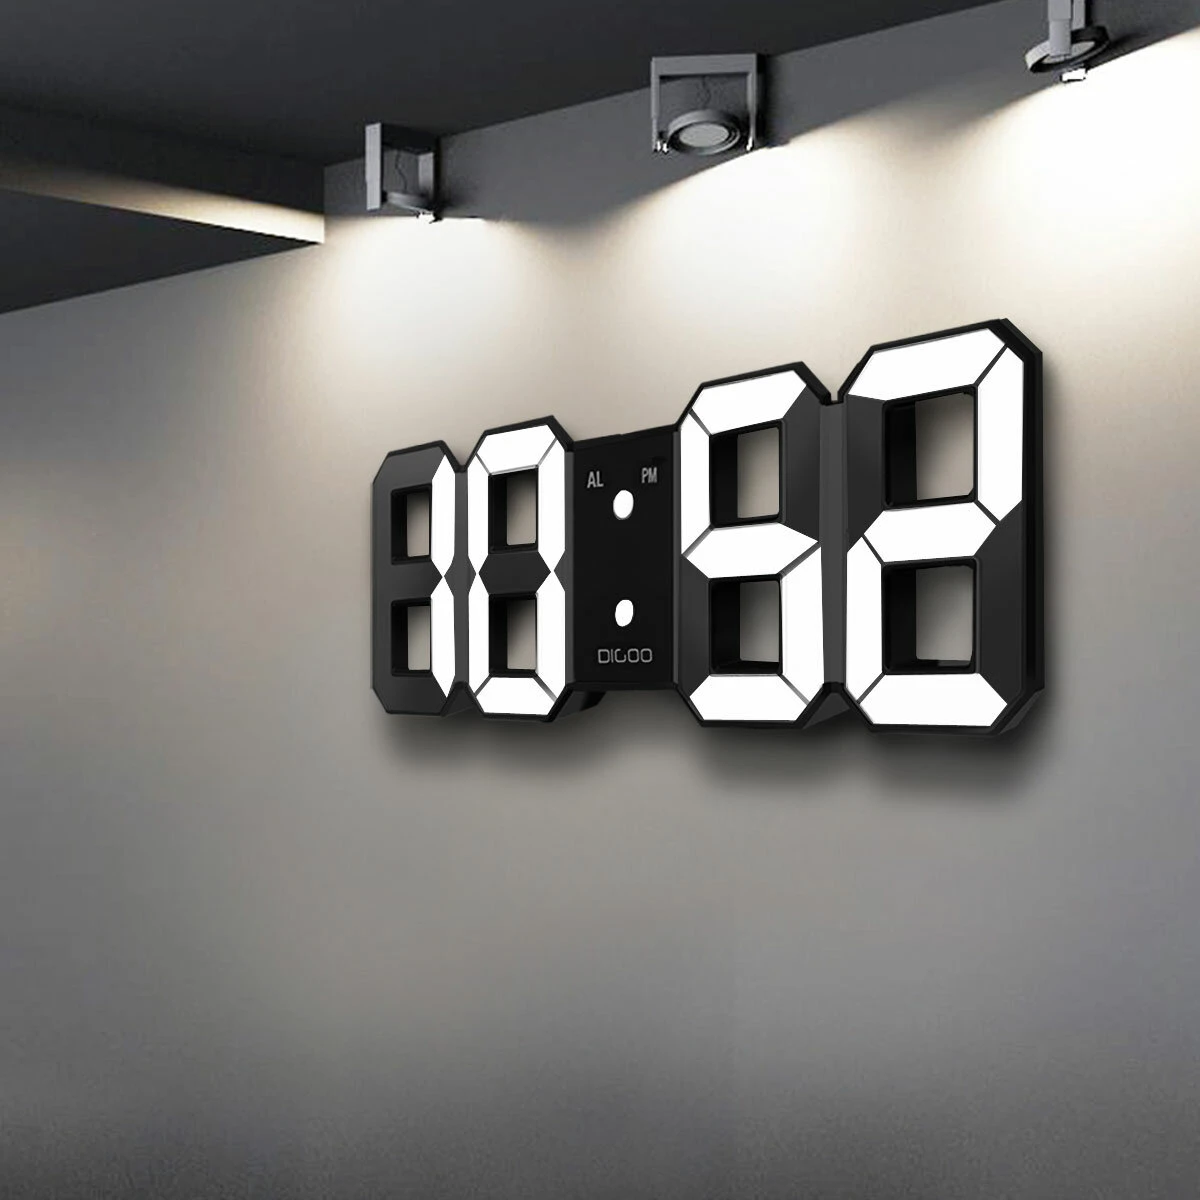 Digoo DC-K3 Multi-Function Large 3D LED Digital Wall Clock Alarm Clock With Snooze Function